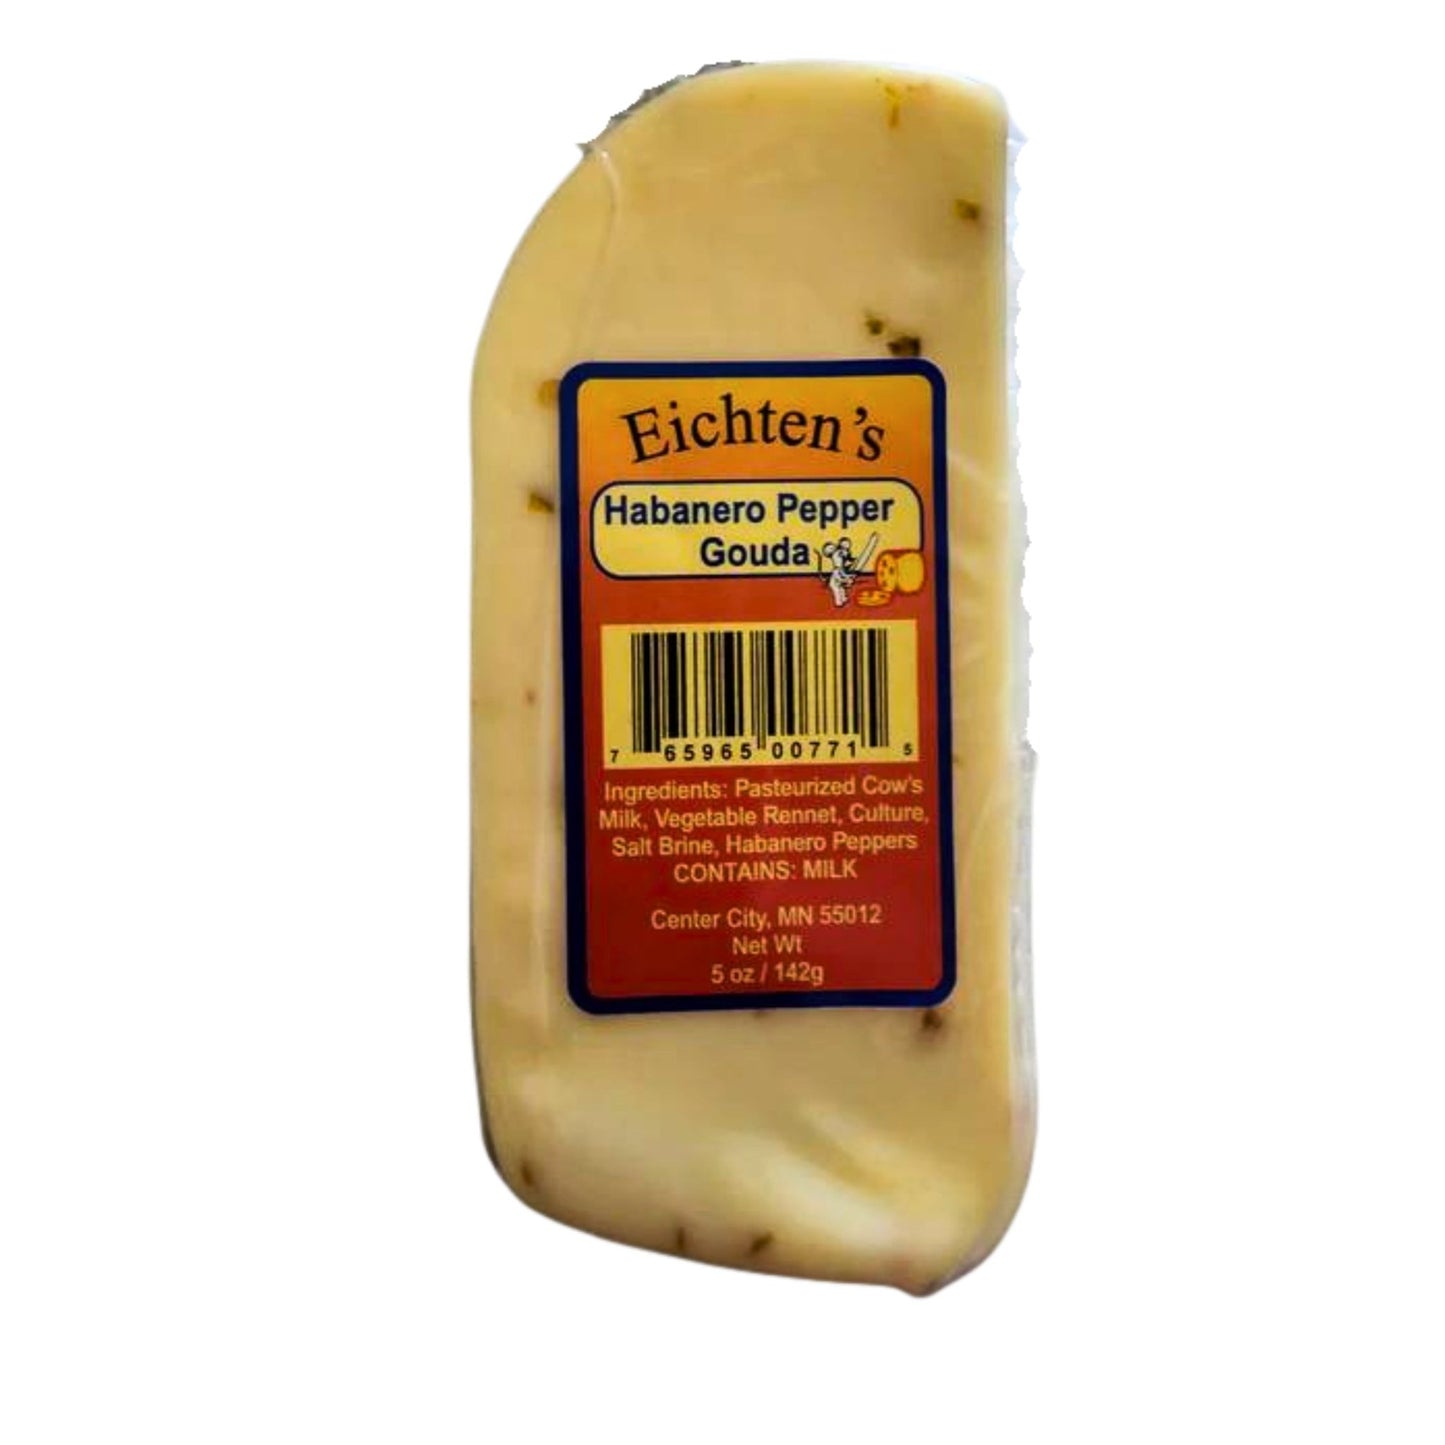 Eichtens Habanero Pepper Gouda Cheese - Eichtens Cheeses, Gifts & FoodsAll Products